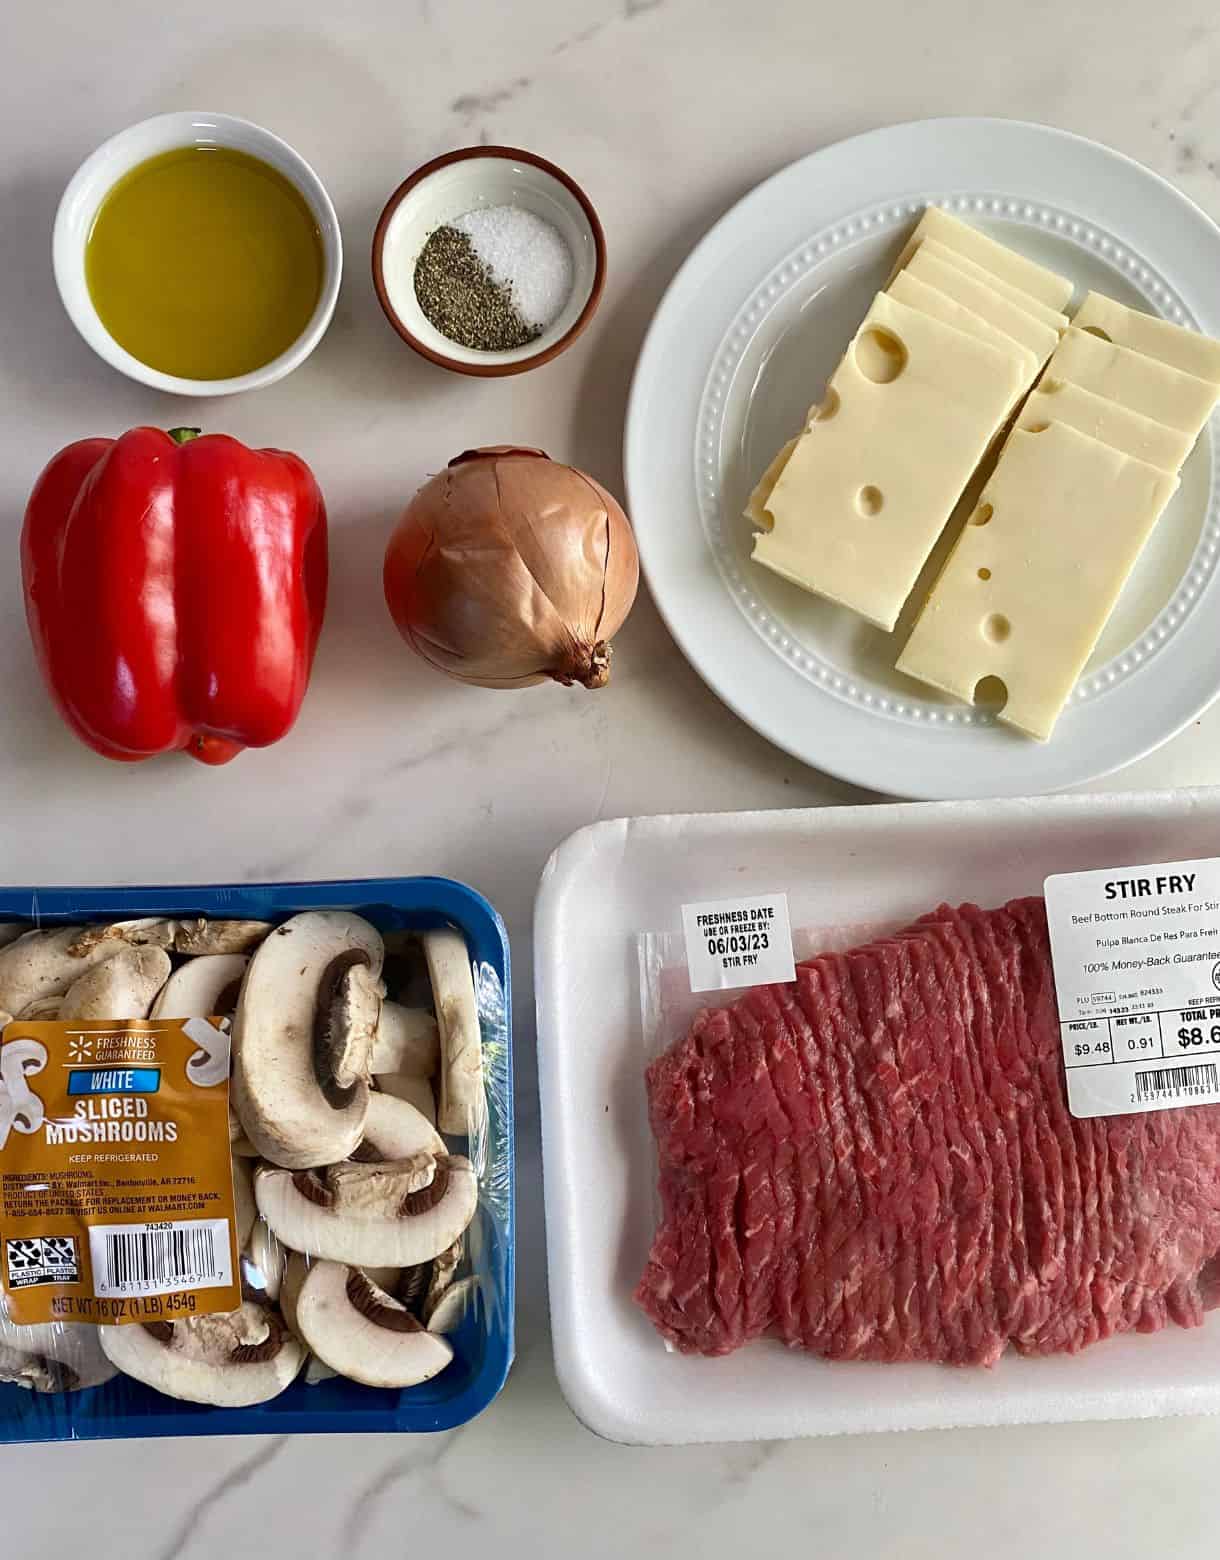 Ingredients for Sheet Pan Philly Cheesesteaks. Sliced mushrooms, sliced beef, sliced Swiss cheese, an onion, a bell pepper, olive oil, salt and pepper.